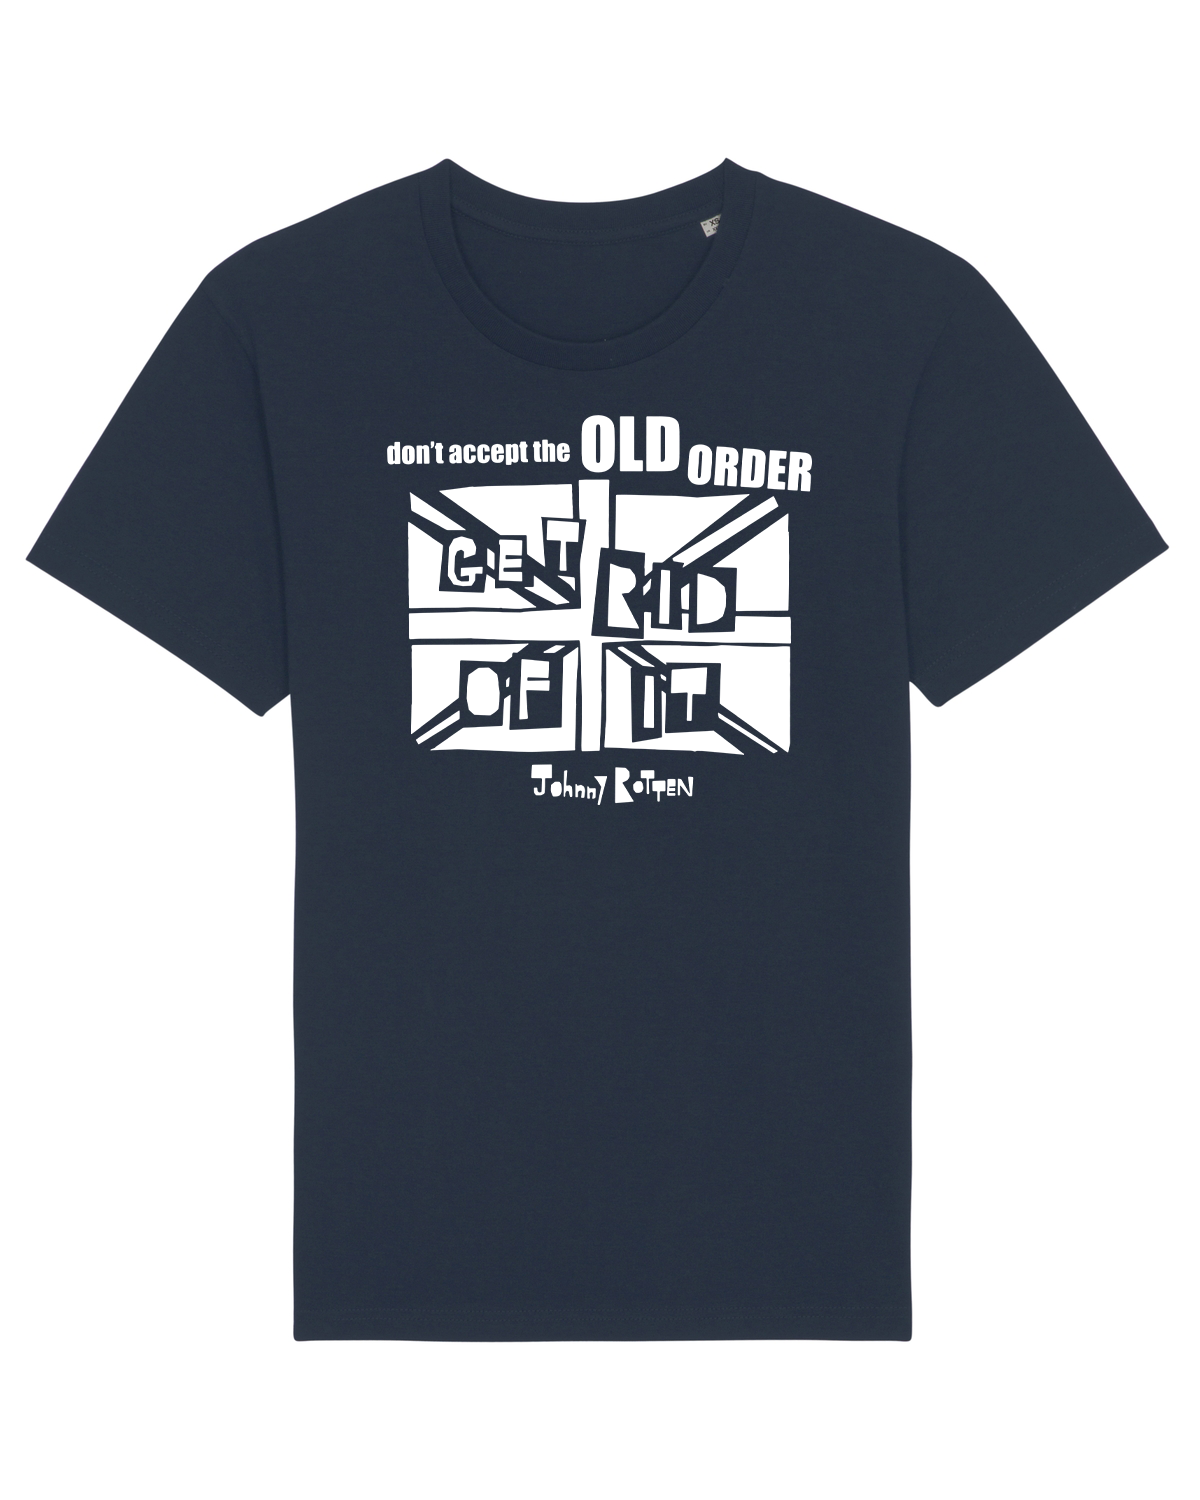 'Don't Accept The Old Order Get Rid Of It' Organic Unisex T-shirt